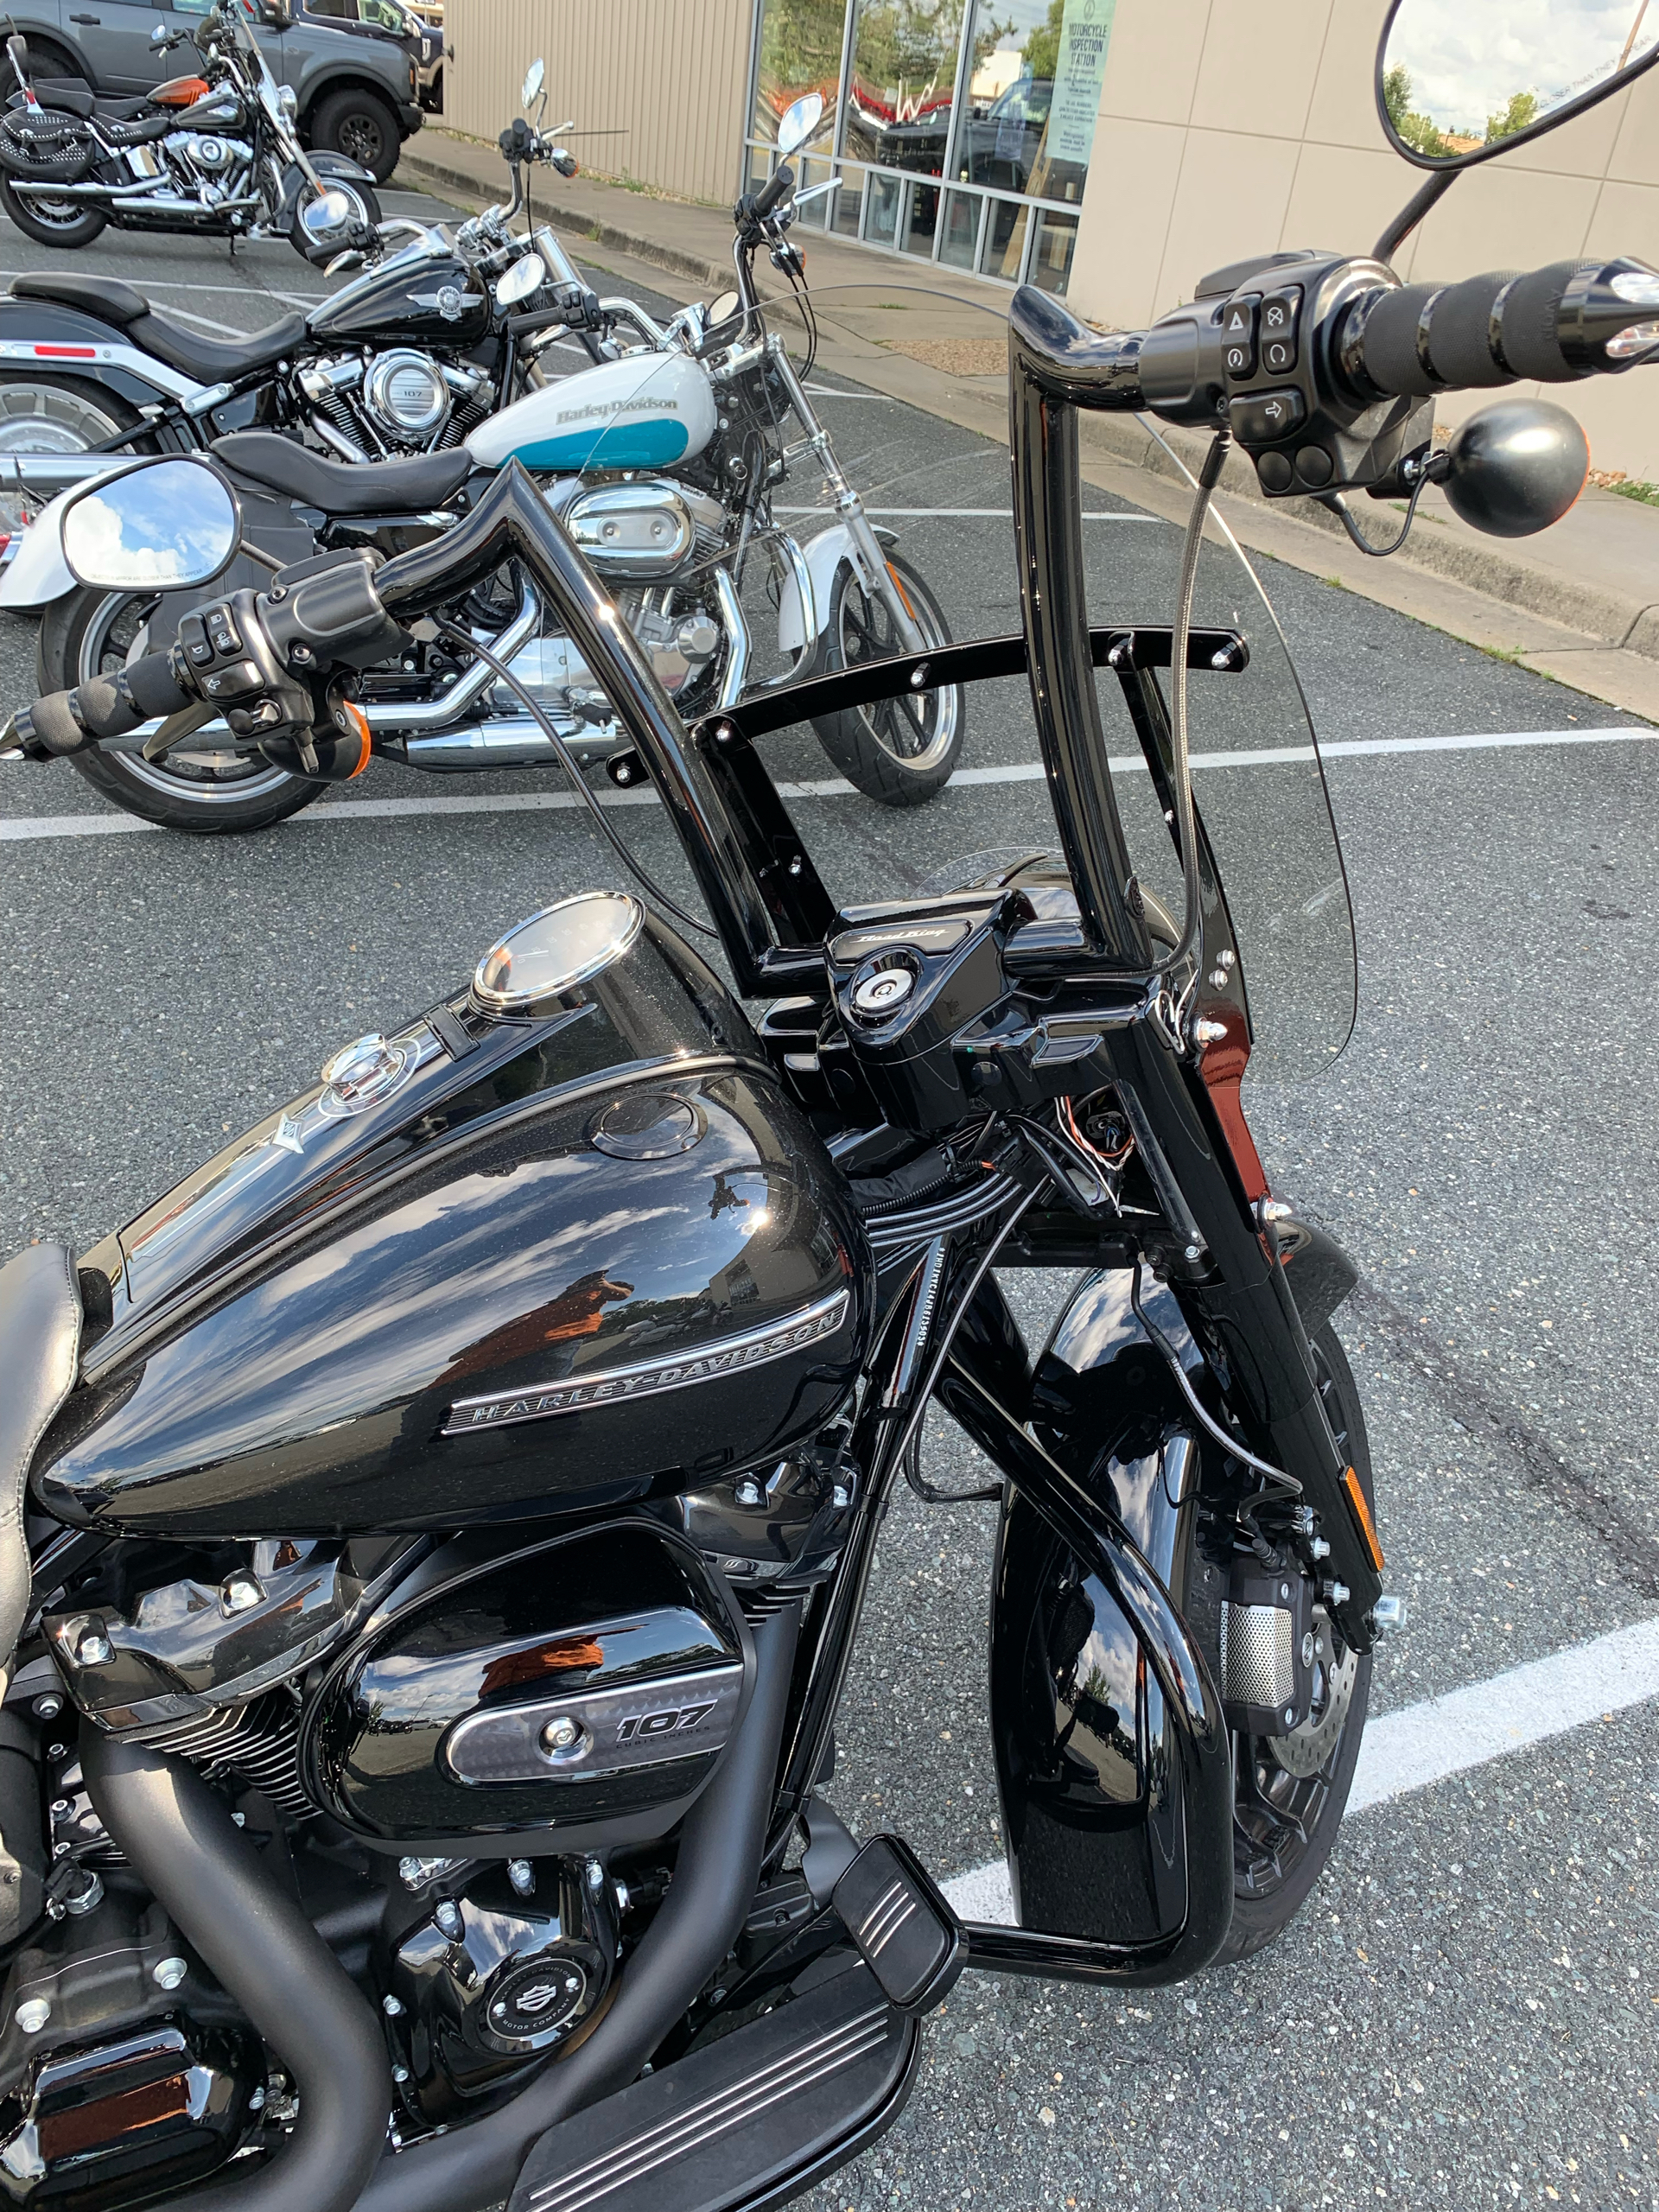 2018 Harley-Davidson ROAD KING SPECIAL in Dumfries, Virginia - Photo 2